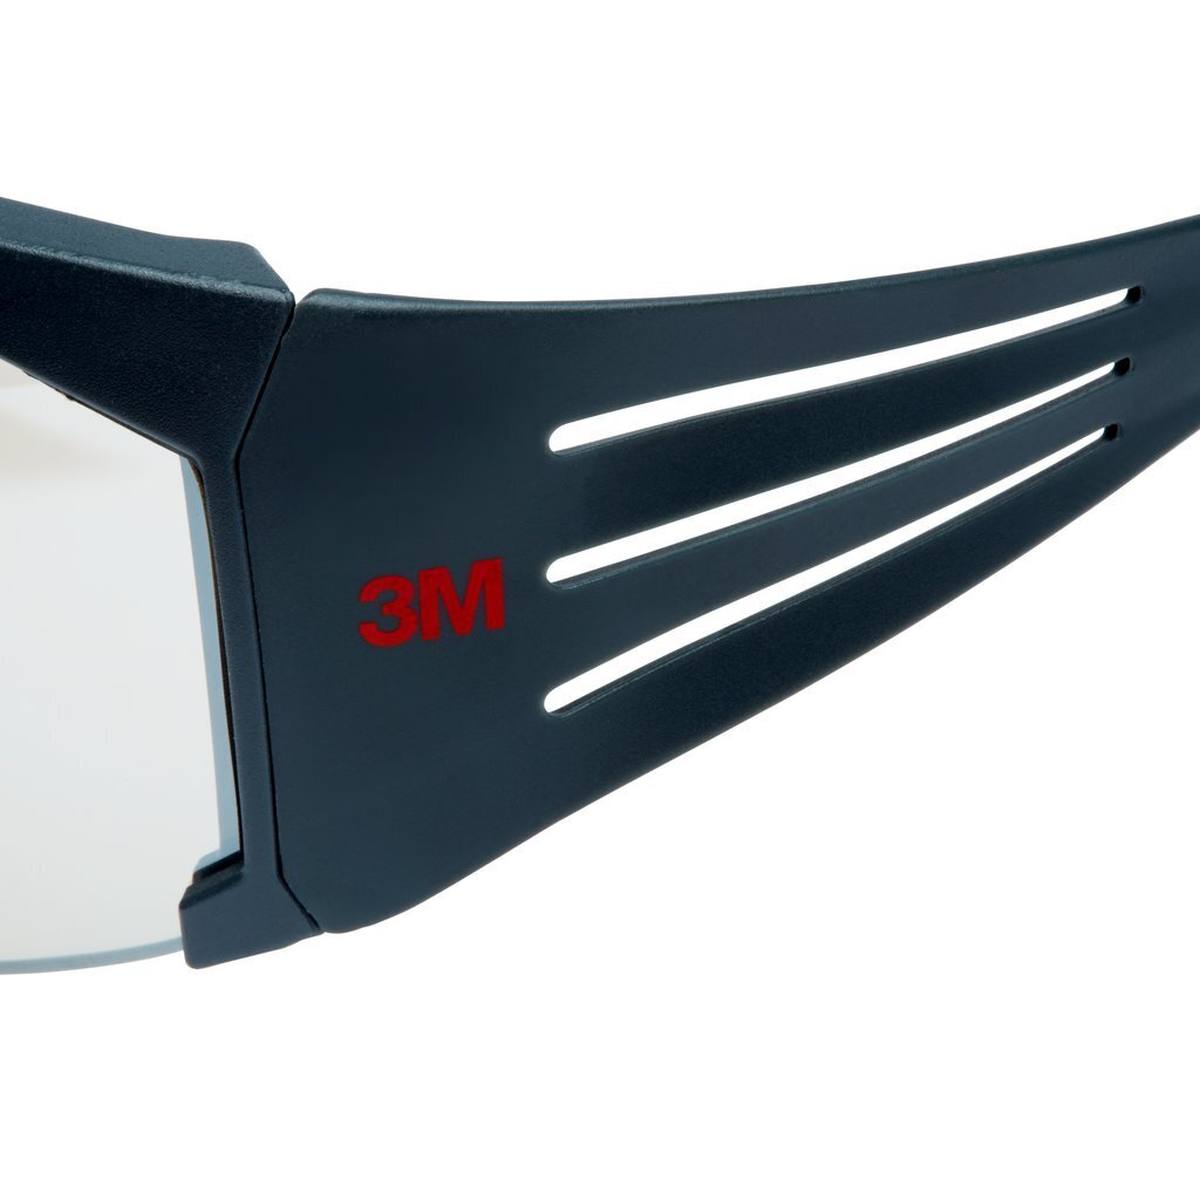 3M SecureFit 600 safety spectacles, grey temples, anti-scratch coating, mirrored lens for indoor/outdoor use, SF610AS-EU